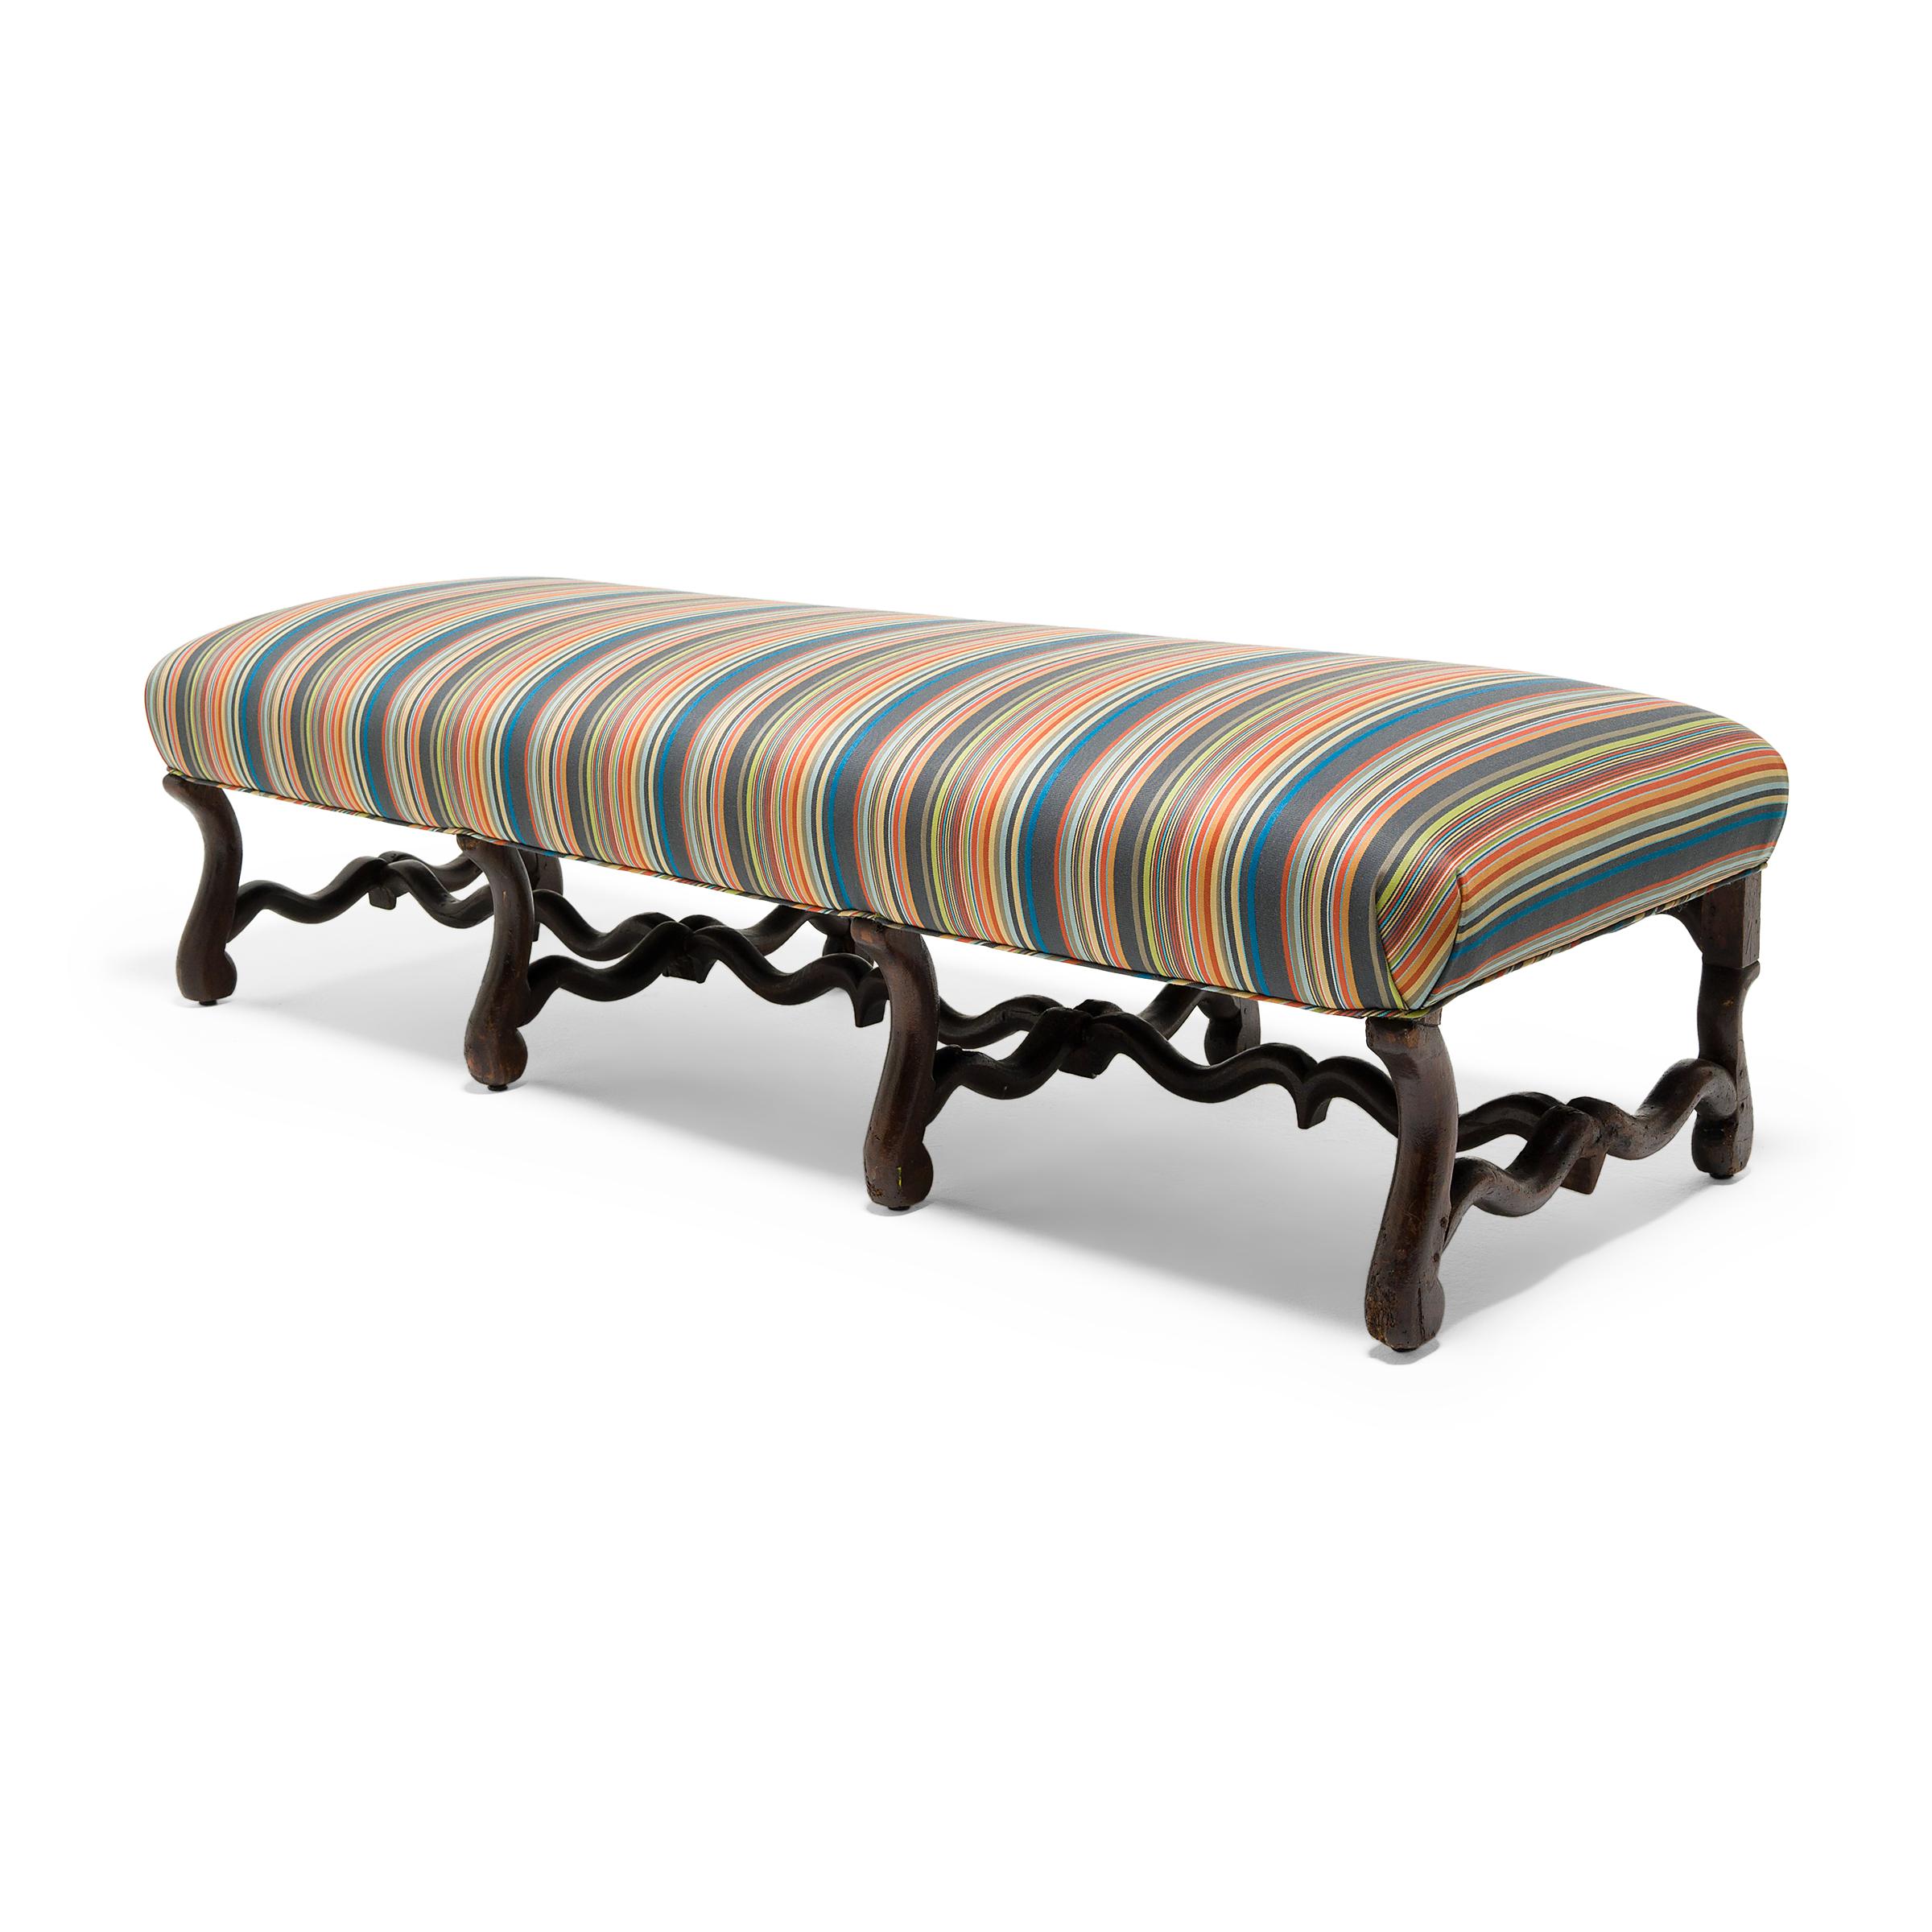 This gorgeous cushioned bench from the late 18th century is crafted in the Louis XIV style with an upholstered top and beautifully carved legs and stretchers. The walnut base is carved in a style known as os-de-mouton, or sheep's bone, a